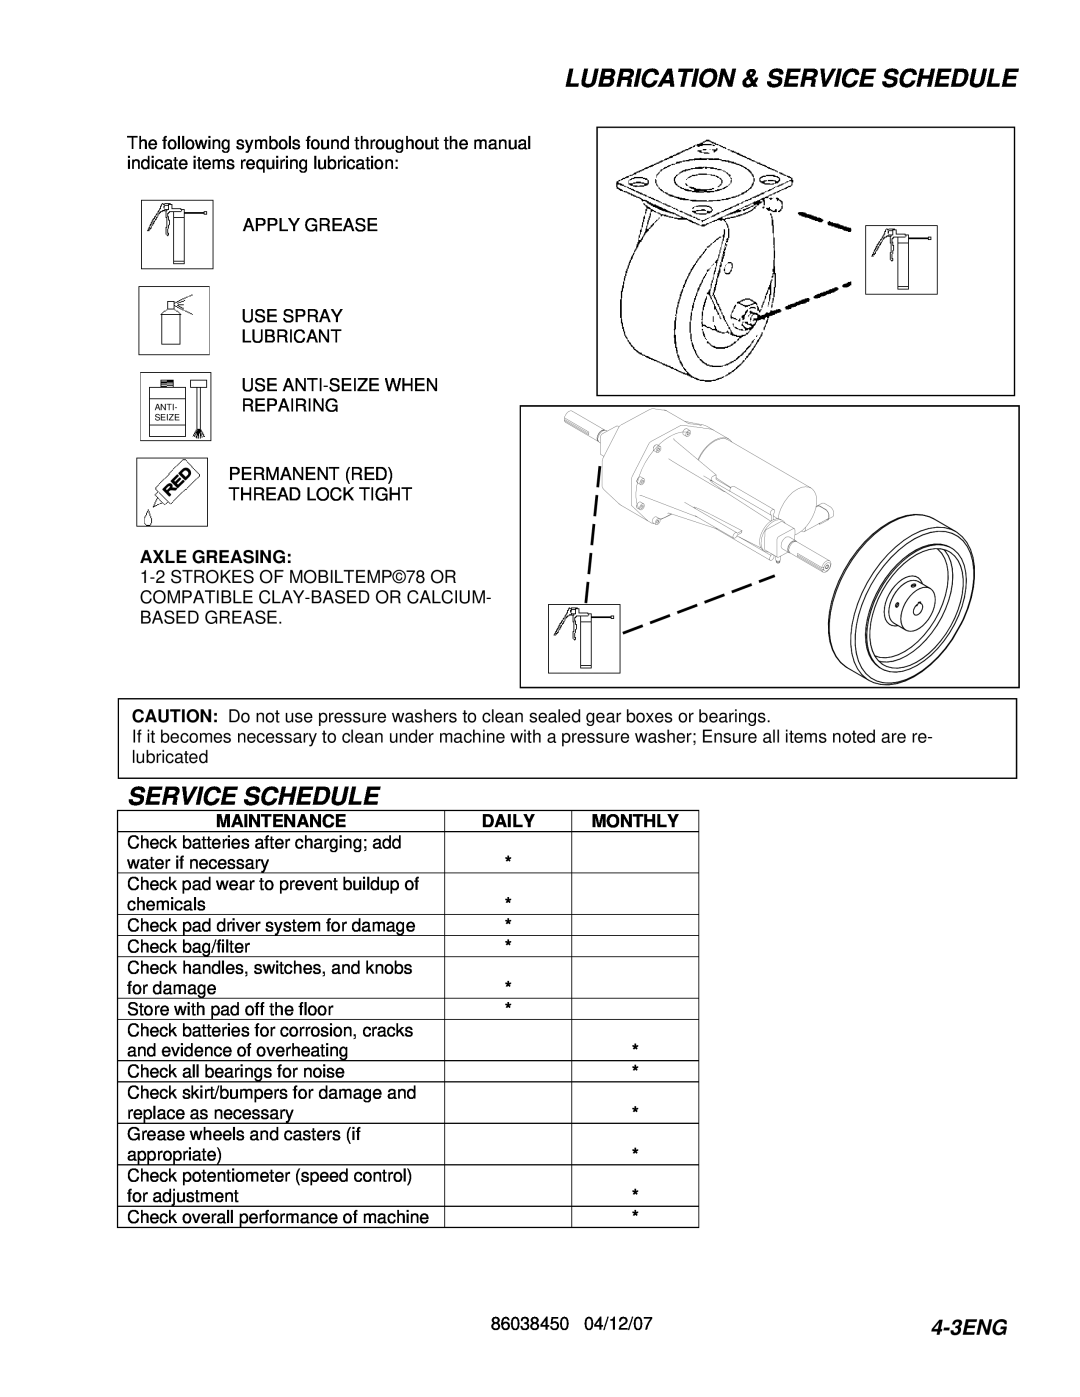 Windsor 10027100, L20T, 10027110 manual Lubrication & Service Schedule, 4-3ENG, Axle Greasing, Maintenance, Daily, Monthly 